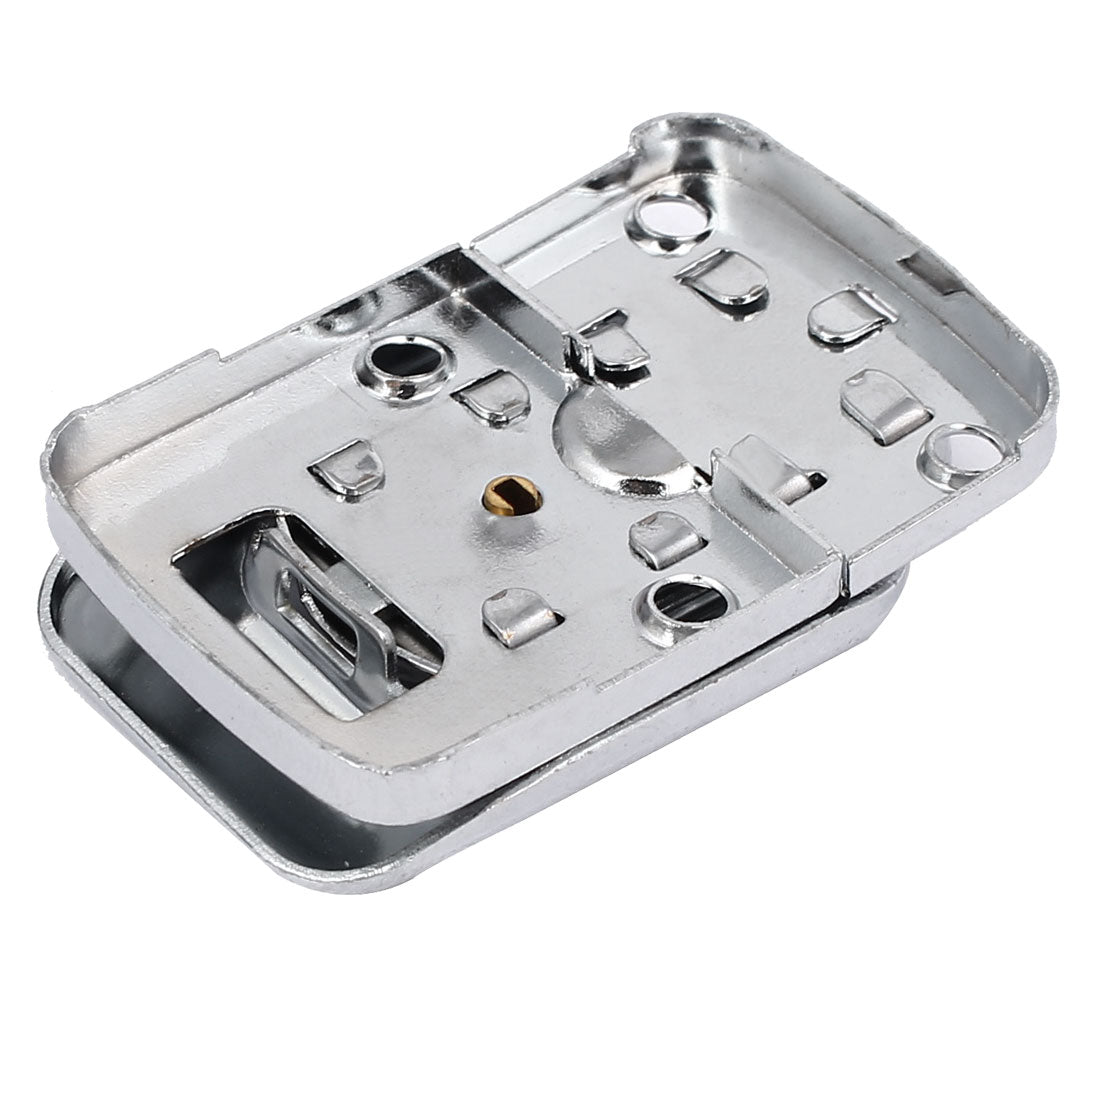 uxcell Uxcell Toolbox Jewelry Box Toggle Latches Catch Hasp Lock Silver Tone 2pcs w Keys